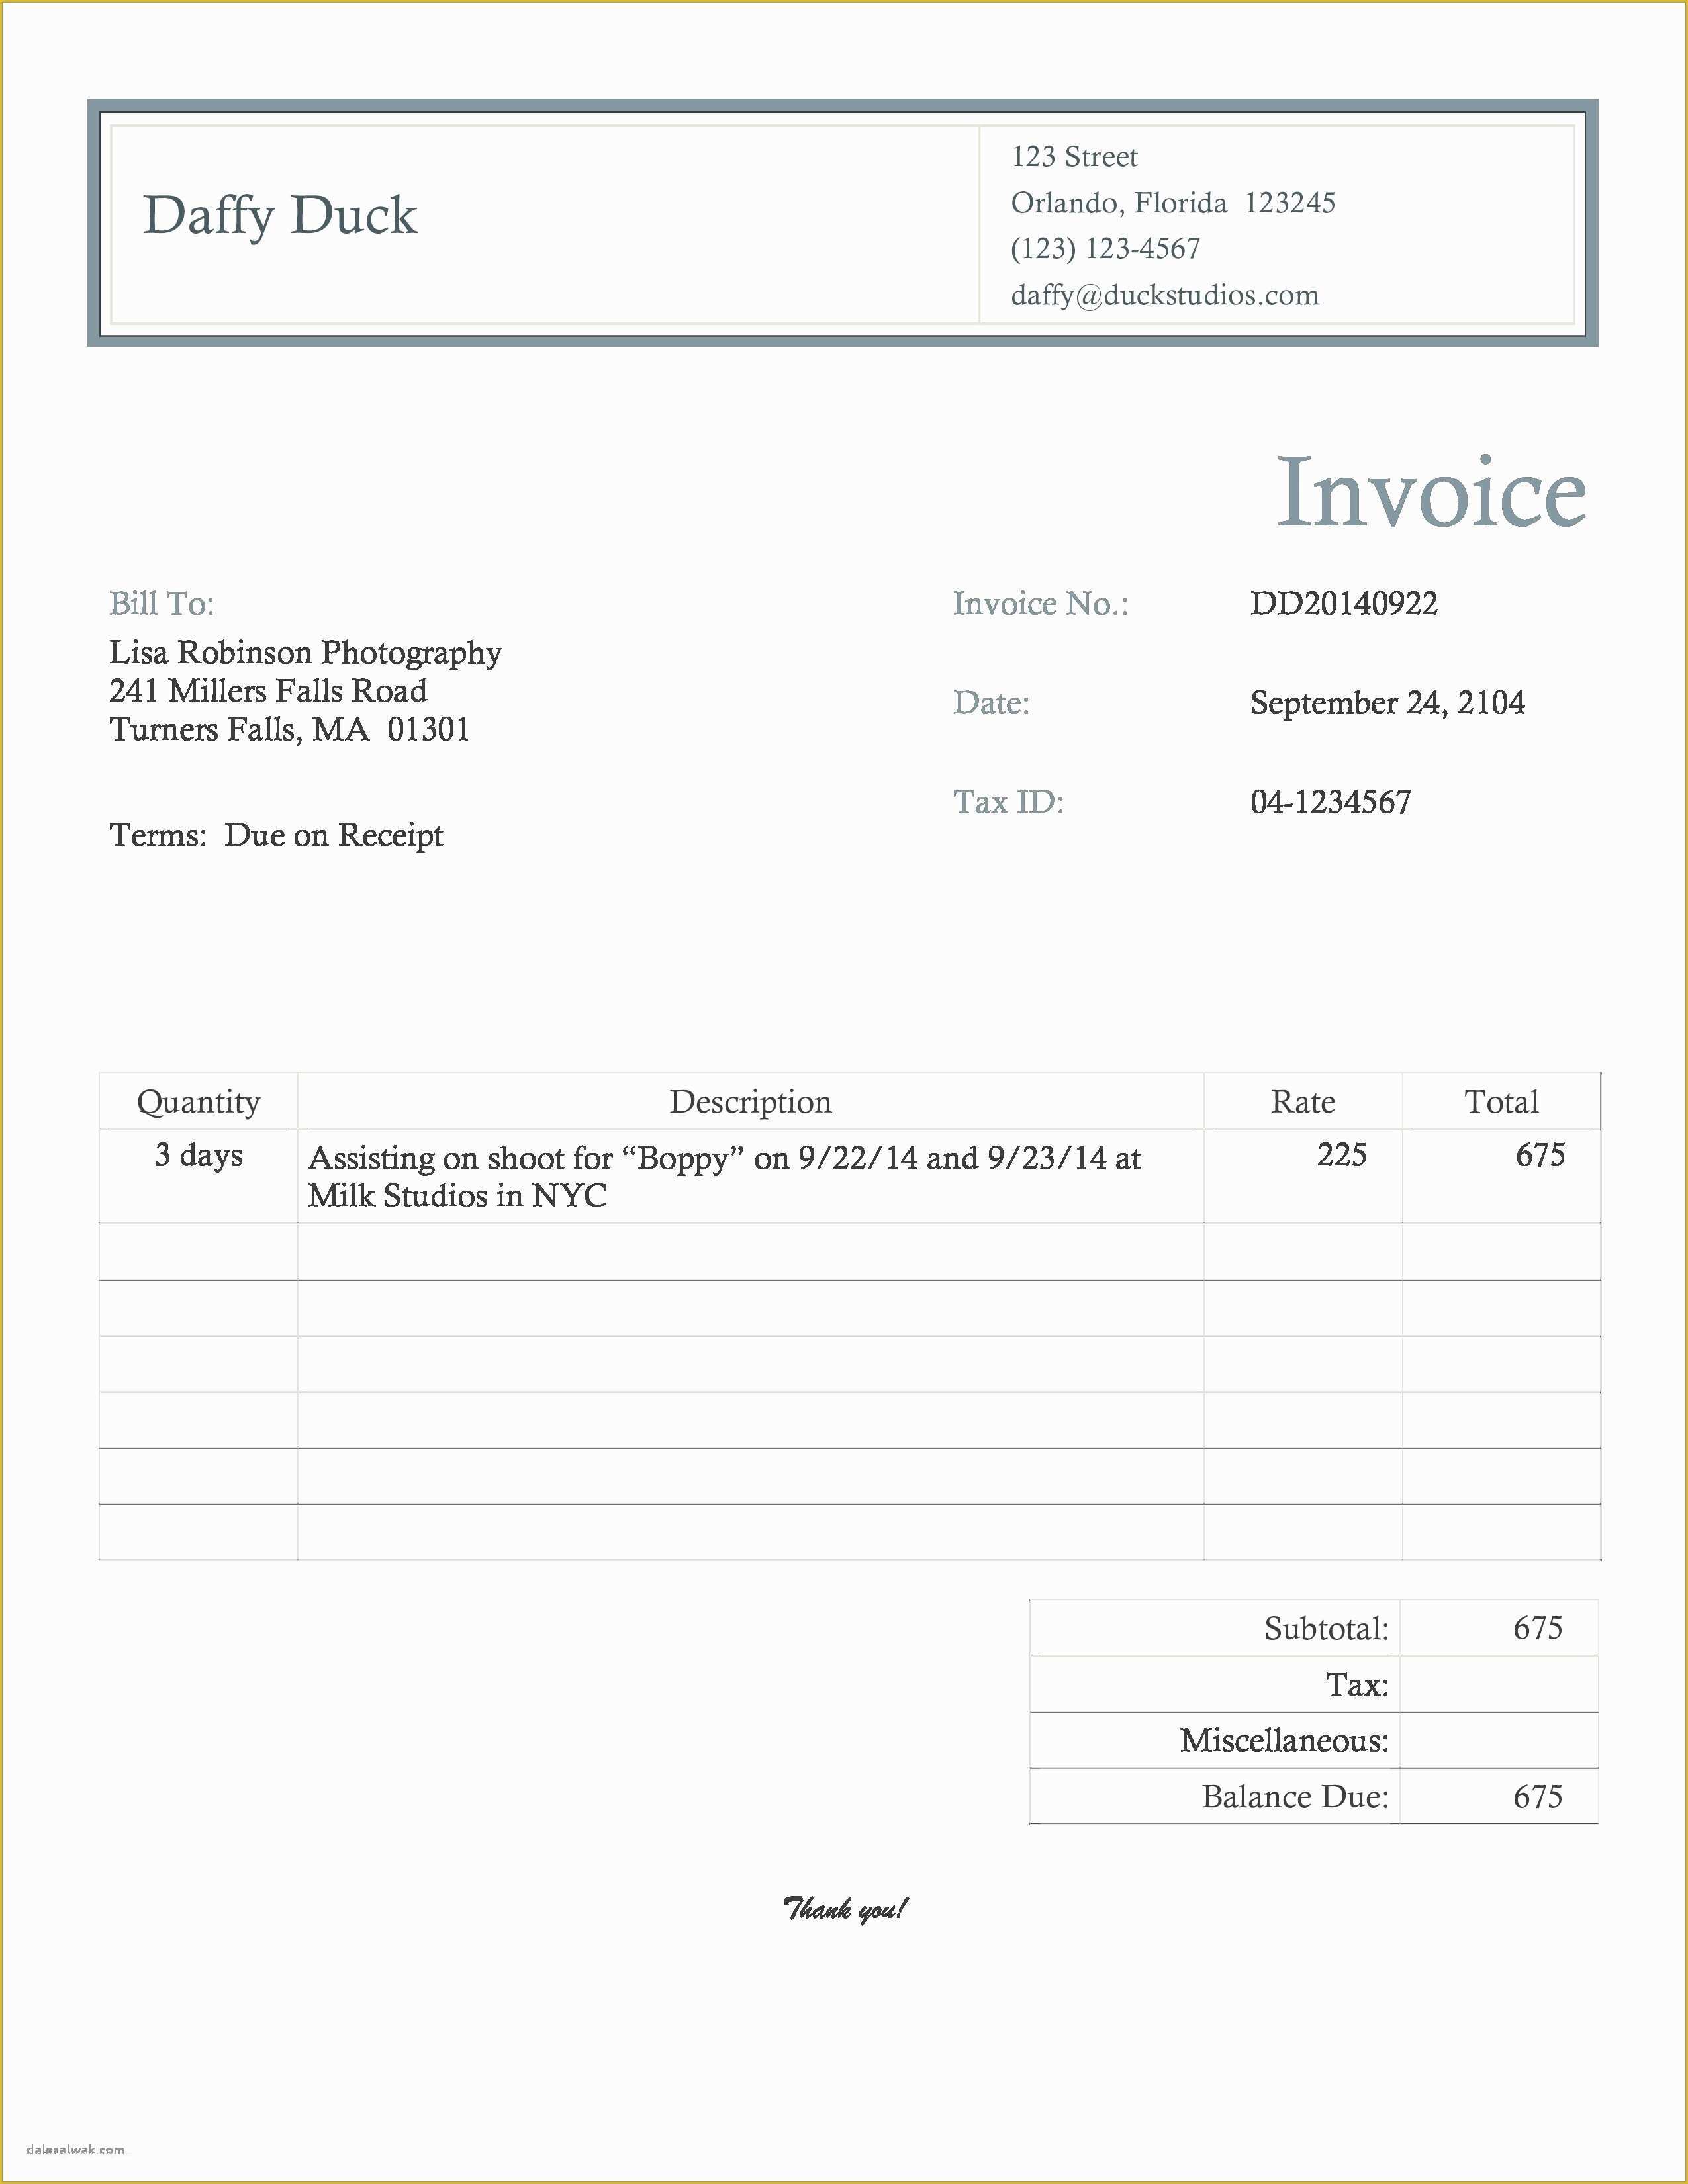 Fill In the Blank Invoice Template Free Of attractive Cash Receipt Template